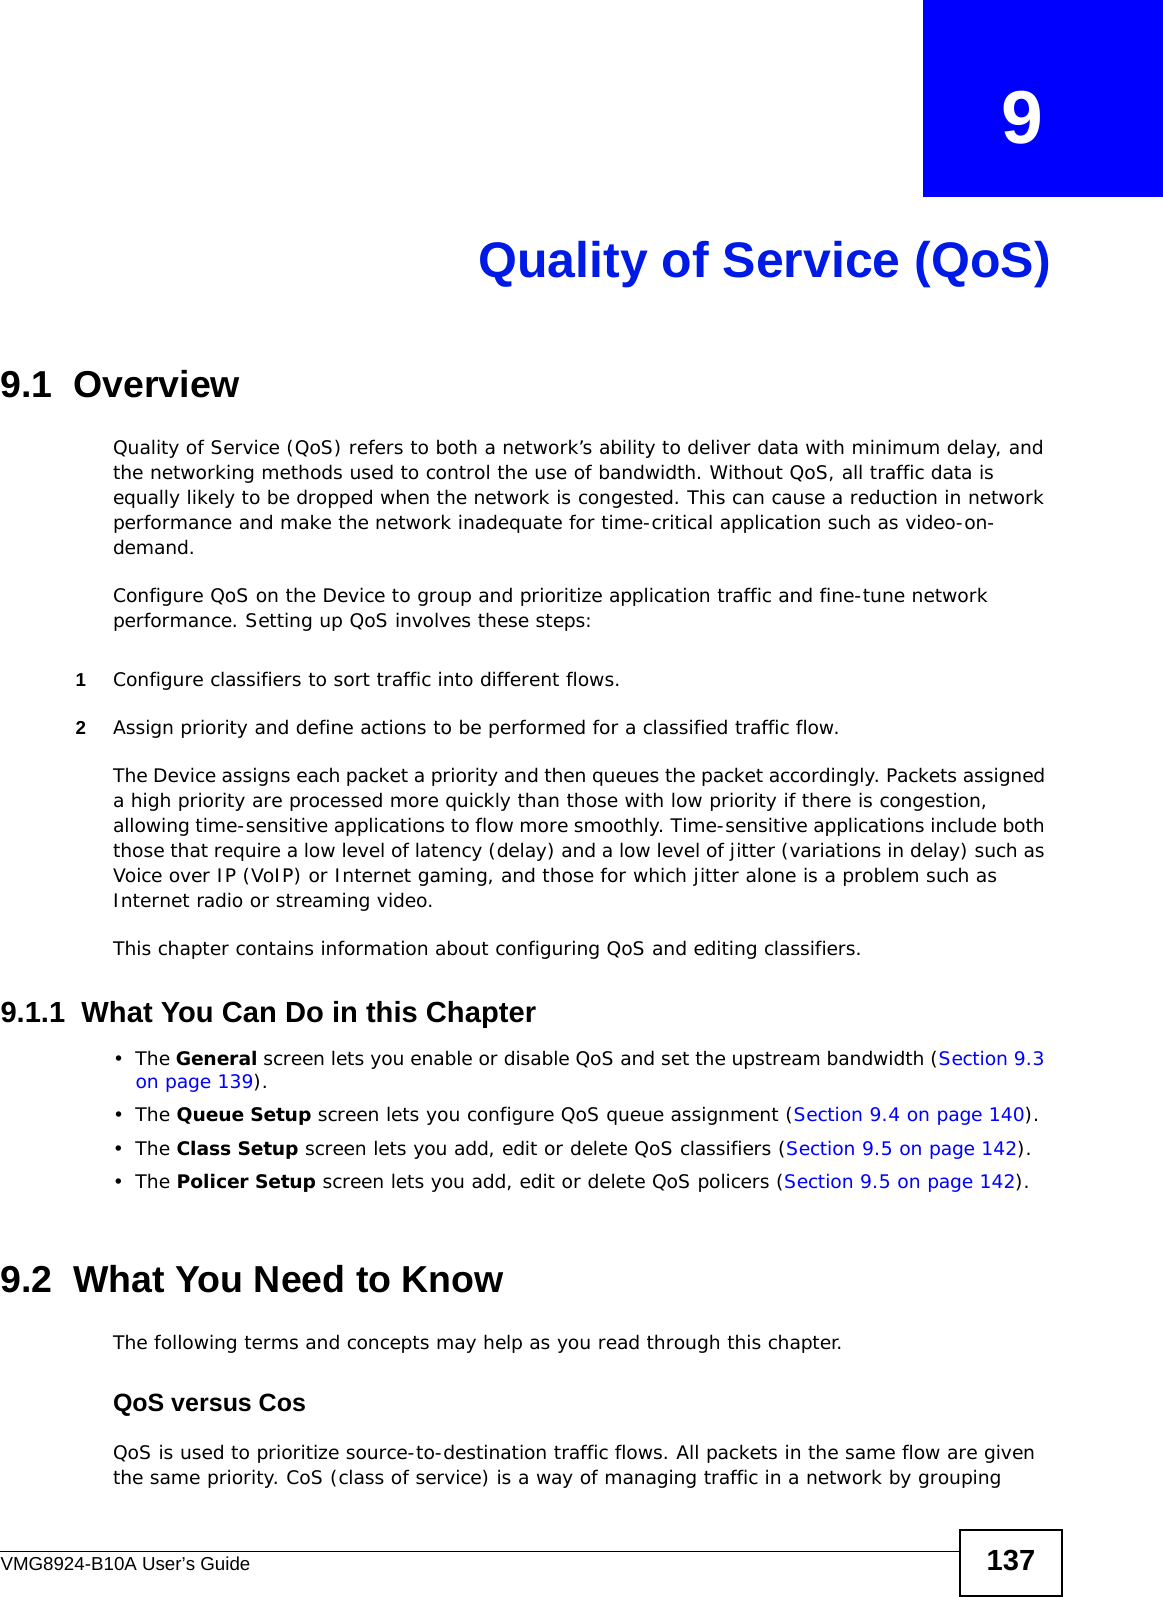 VMG8924-B10A User’s Guide 137CHAPTER   9Quality of Service (QoS)9.1  Overview Quality of Service (QoS) refers to both a network’s ability to deliver data with minimum delay, and the networking methods used to control the use of bandwidth. Without QoS, all traffic data is equally likely to be dropped when the network is congested. This can cause a reduction in network performance and make the network inadequate for time-critical application such as video-on-demand.Configure QoS on the Device to group and prioritize application traffic and fine-tune network performance. Setting up QoS involves these steps:1Configure classifiers to sort traffic into different flows. 2Assign priority and define actions to be performed for a classified traffic flow. The Device assigns each packet a priority and then queues the packet accordingly. Packets assigned a high priority are processed more quickly than those with low priority if there is congestion, allowing time-sensitive applications to flow more smoothly. Time-sensitive applications include both those that require a low level of latency (delay) and a low level of jitter (variations in delay) such as Voice over IP (VoIP) or Internet gaming, and those for which jitter alone is a problem such as Internet radio or streaming video.This chapter contains information about configuring QoS and editing classifiers.9.1.1  What You Can Do in this Chapter•The General screen lets you enable or disable QoS and set the upstream bandwidth (Section 9.3 on page 139).•The Queue Setup screen lets you configure QoS queue assignment (Section 9.4 on page 140).•The Class Setup screen lets you add, edit or delete QoS classifiers (Section 9.5 on page 142).•The Policer Setup screen lets you add, edit or delete QoS policers (Section 9.5 on page 142).9.2  What You Need to KnowThe following terms and concepts may help as you read through this chapter.QoS versus CosQoS is used to prioritize source-to-destination traffic flows. All packets in the same flow are given the same priority. CoS (class of service) is a way of managing traffic in a network by grouping 